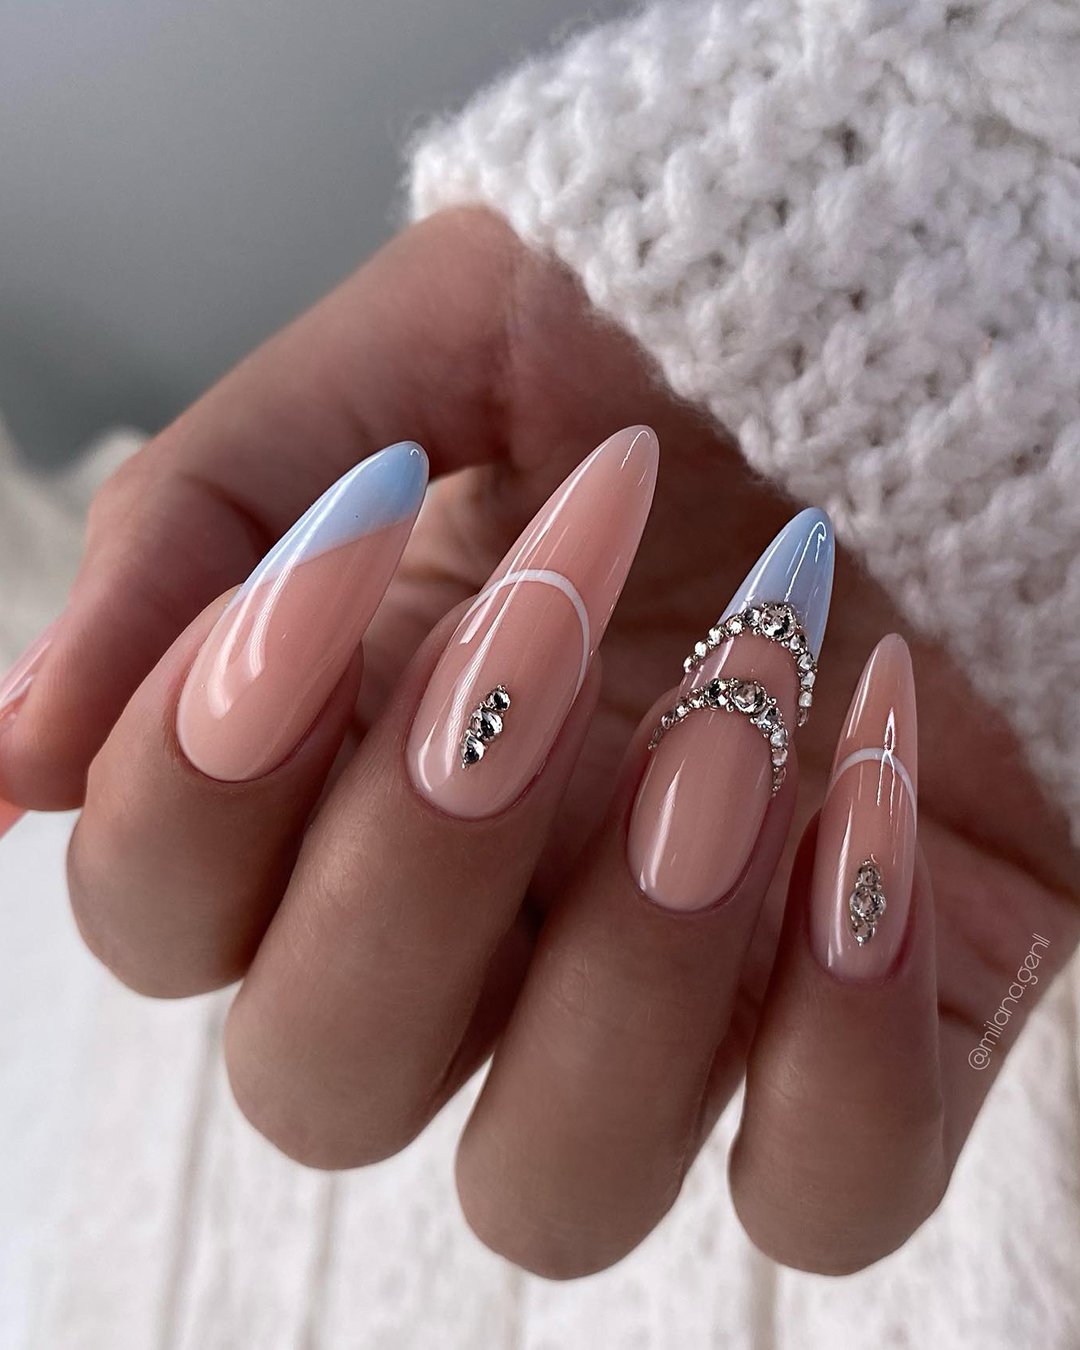 wedding nails design long nude with rhinestones and blue milana.gen11